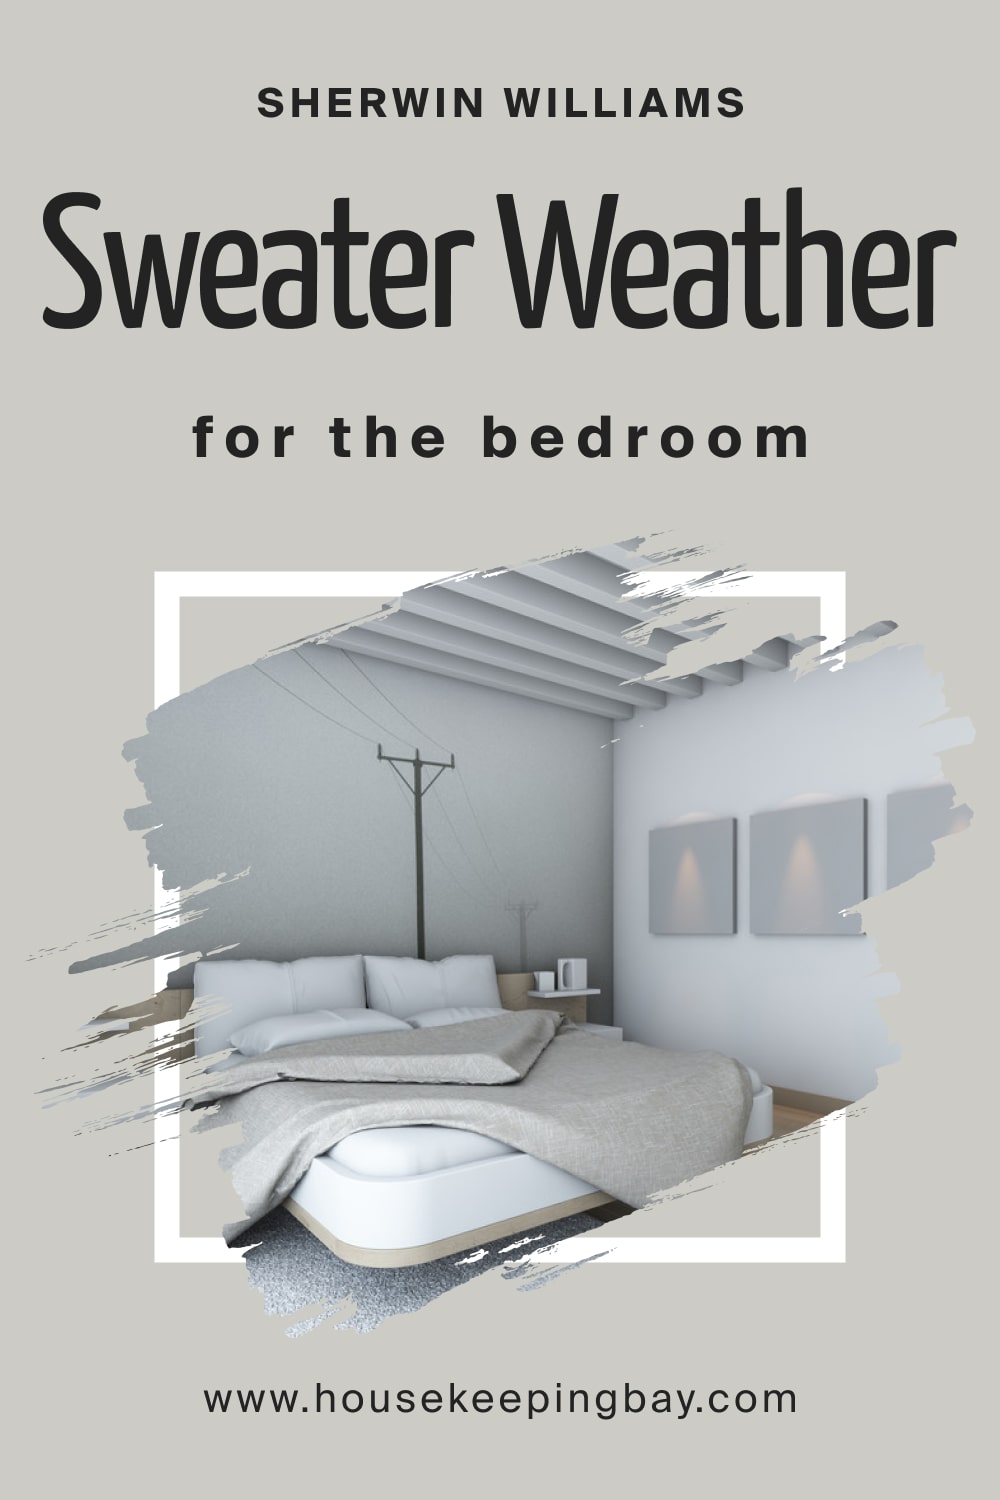 Sherwin Williams. Sweater Weather SW 9548 For the bedroom